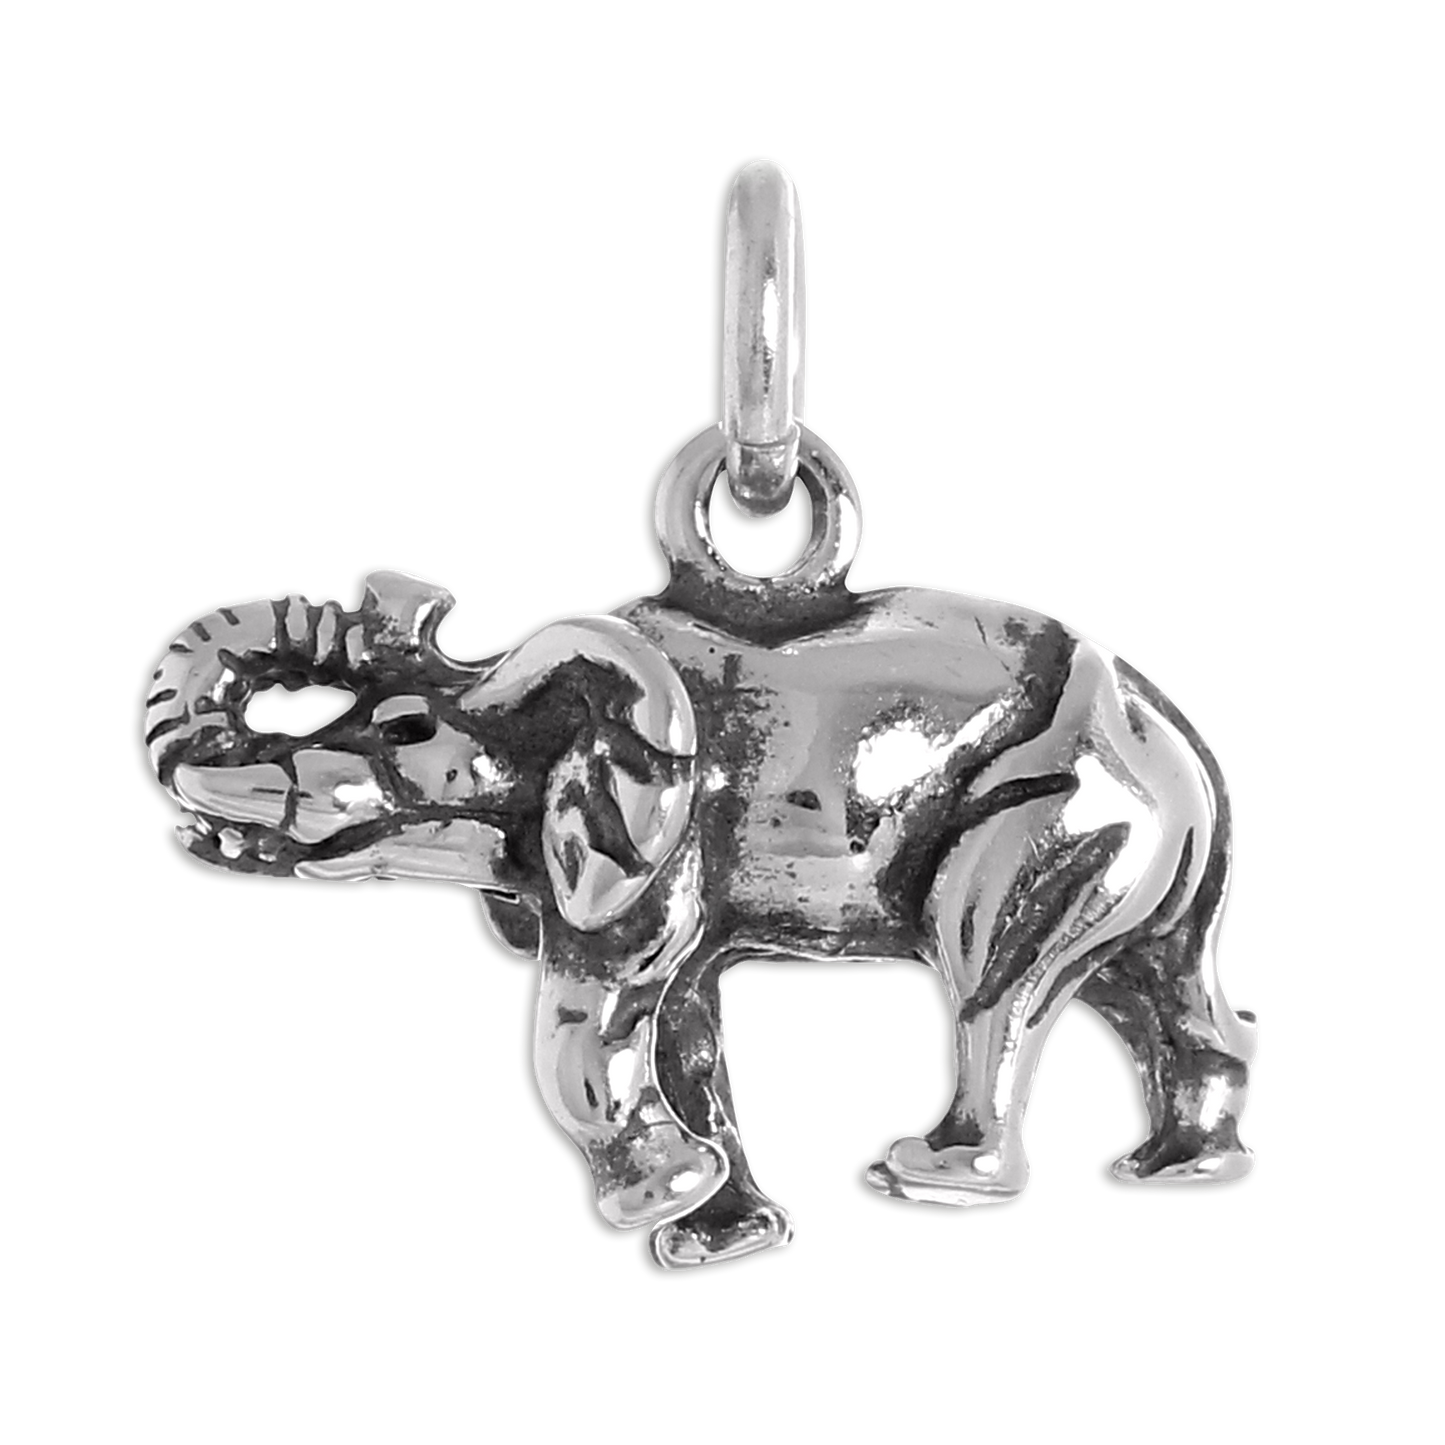 Sterling Silver Elephant Charm